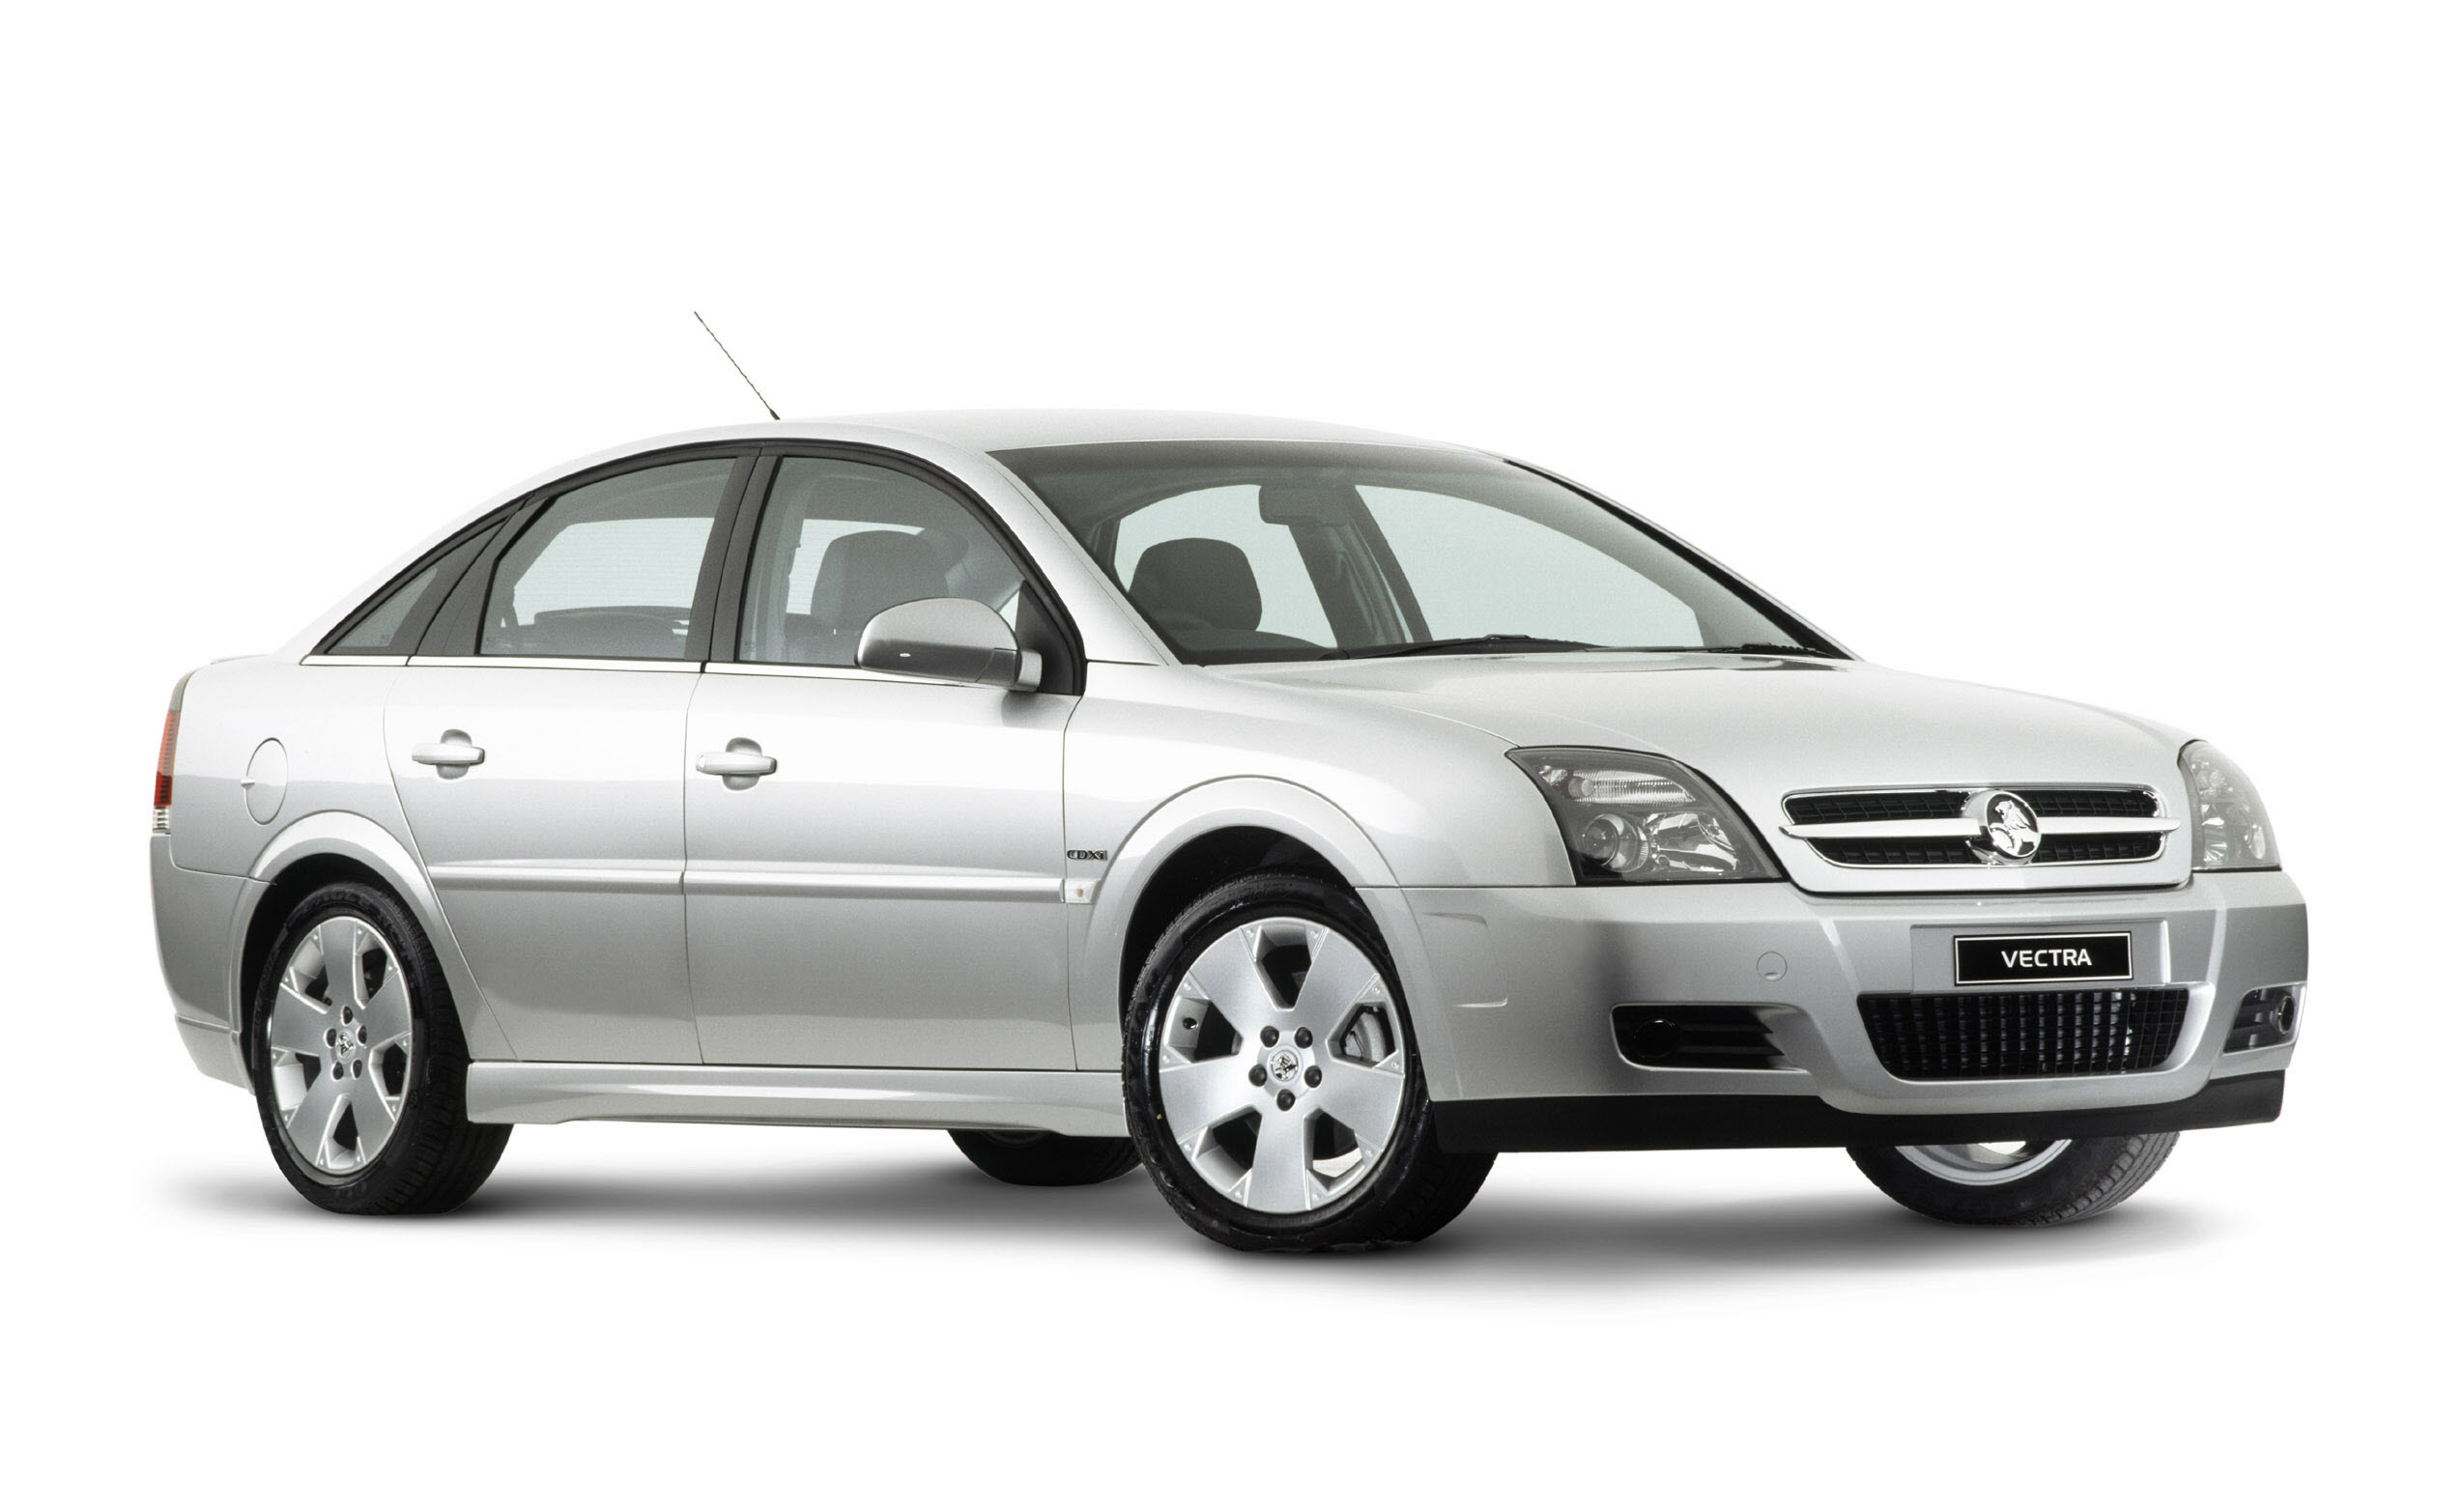 HOLDEN VECTRA CAR ANTENNA REPLACEMENTS. View as: List Grid